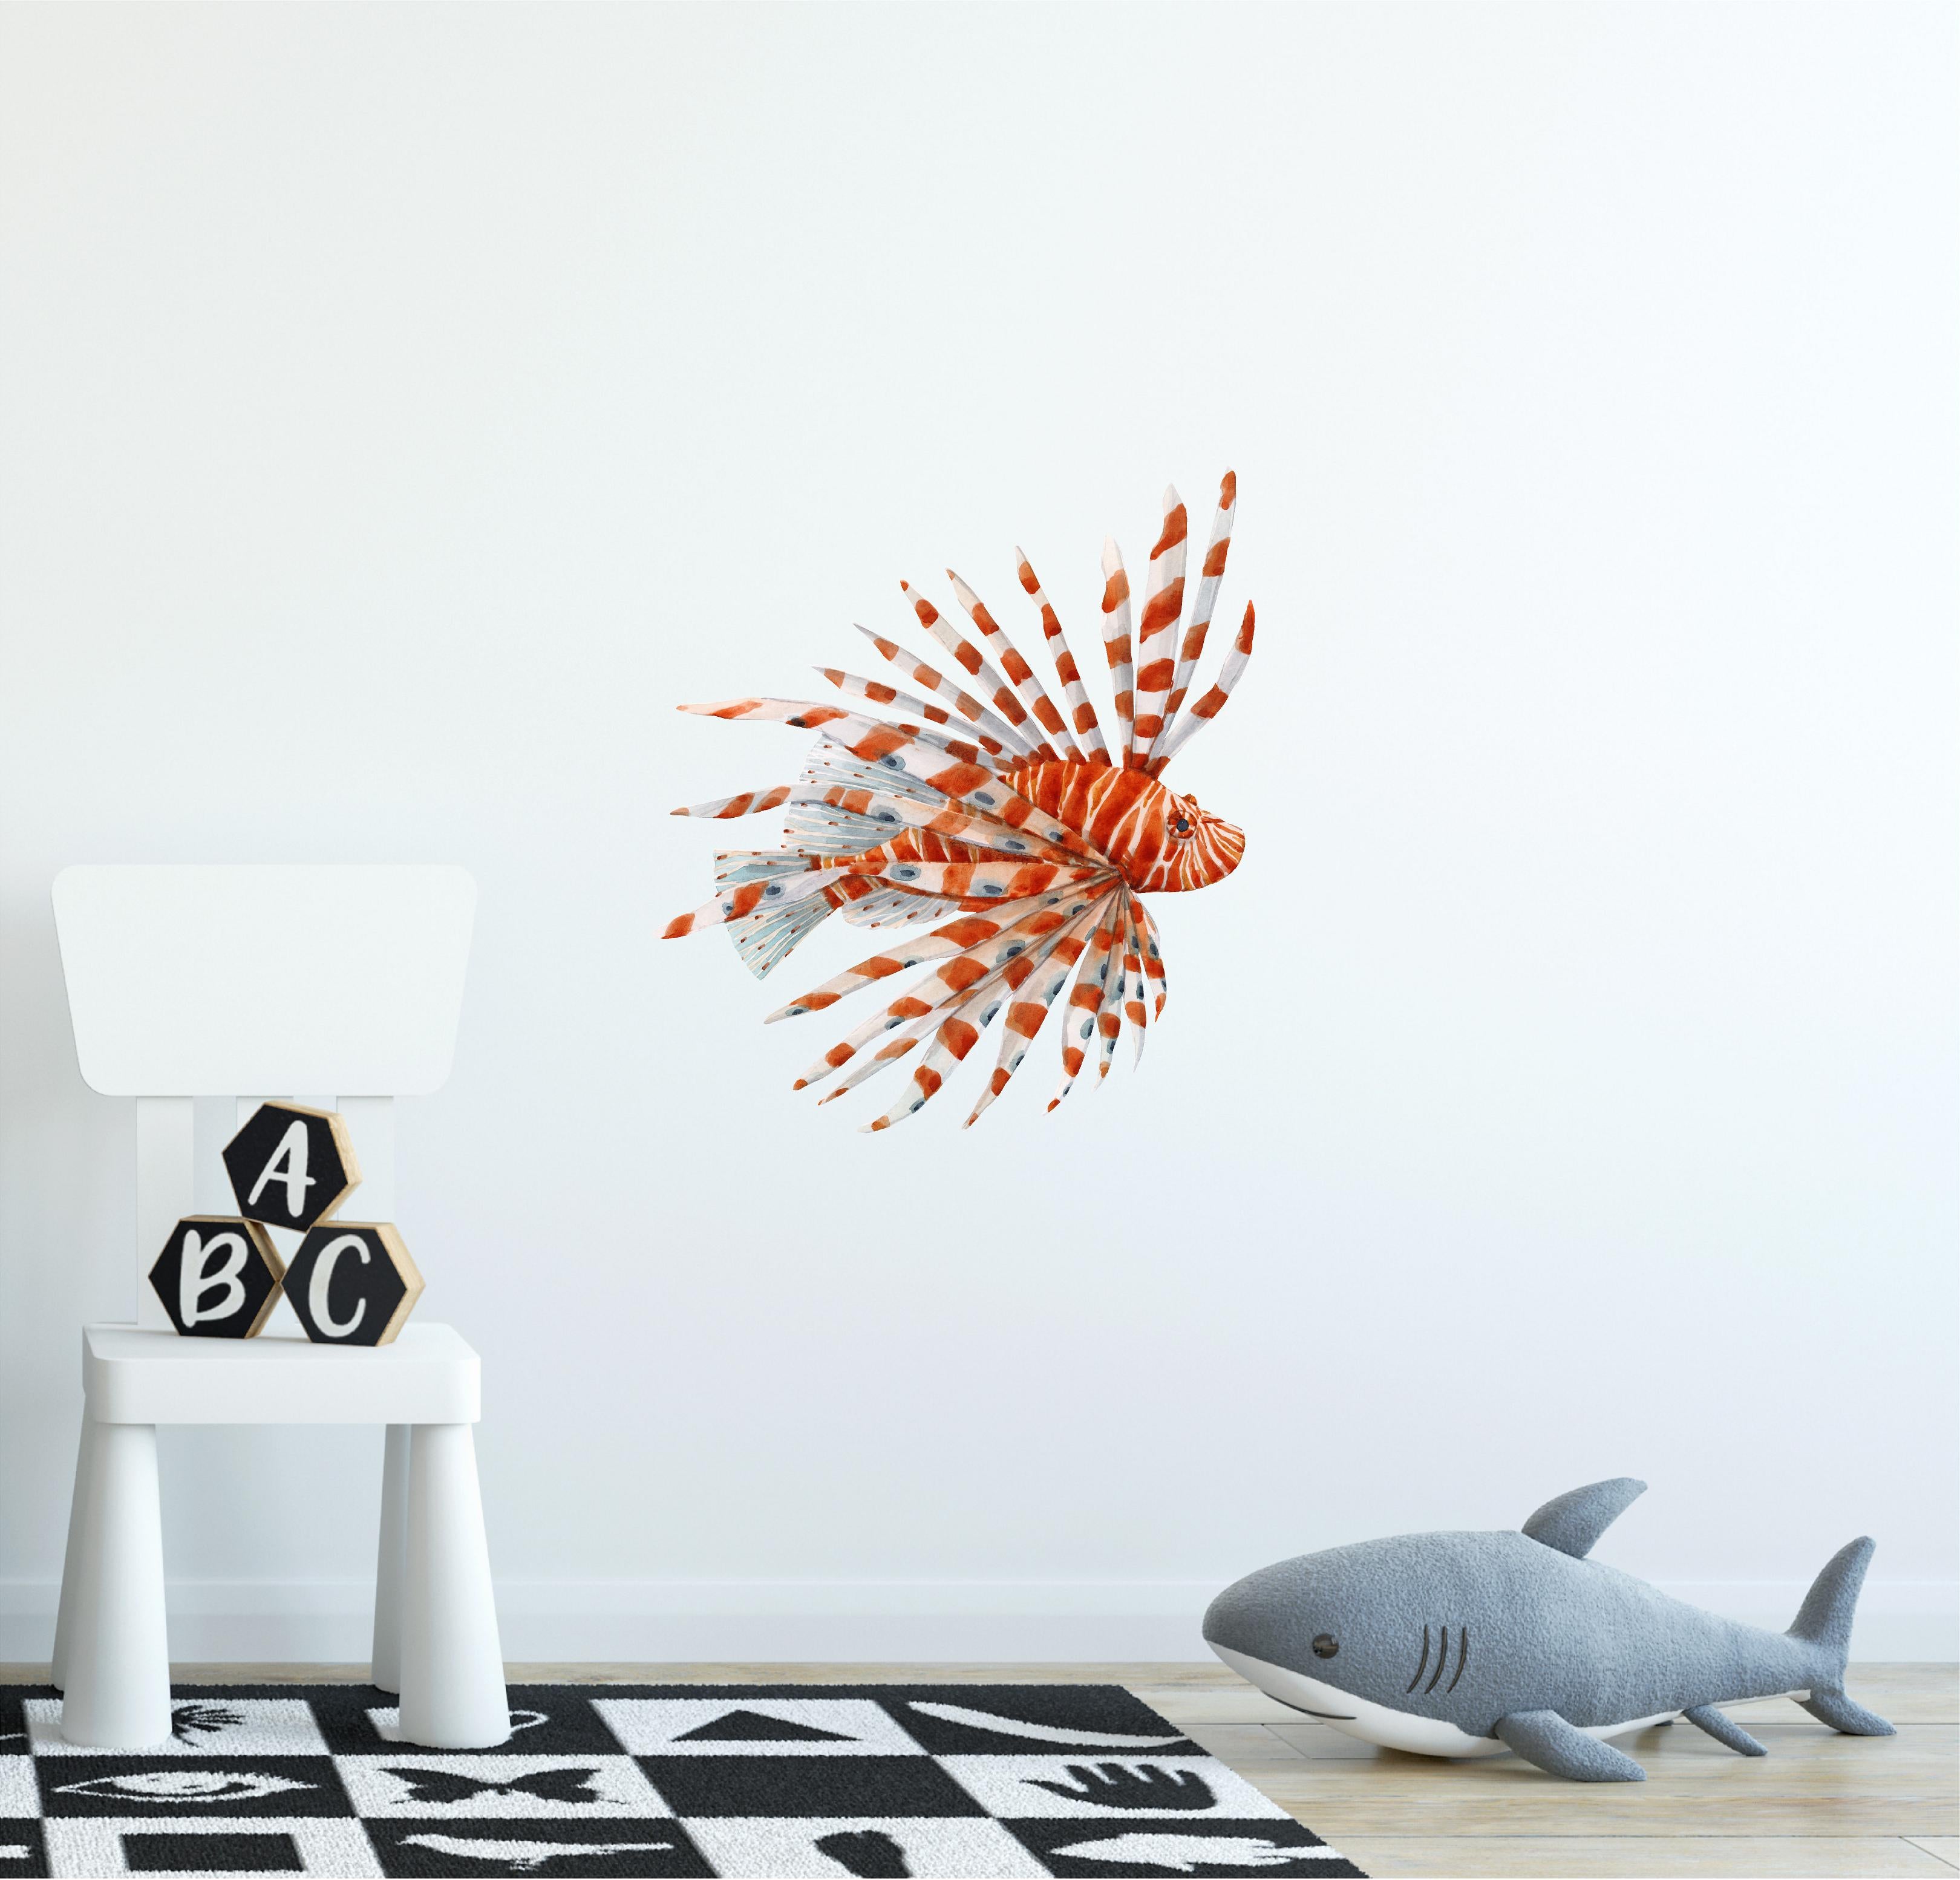 Exotic Lionfish #4 Fish Wall Decal Tropical Fish Ocean Removable Fabric Wall Sticker | DecalBaby